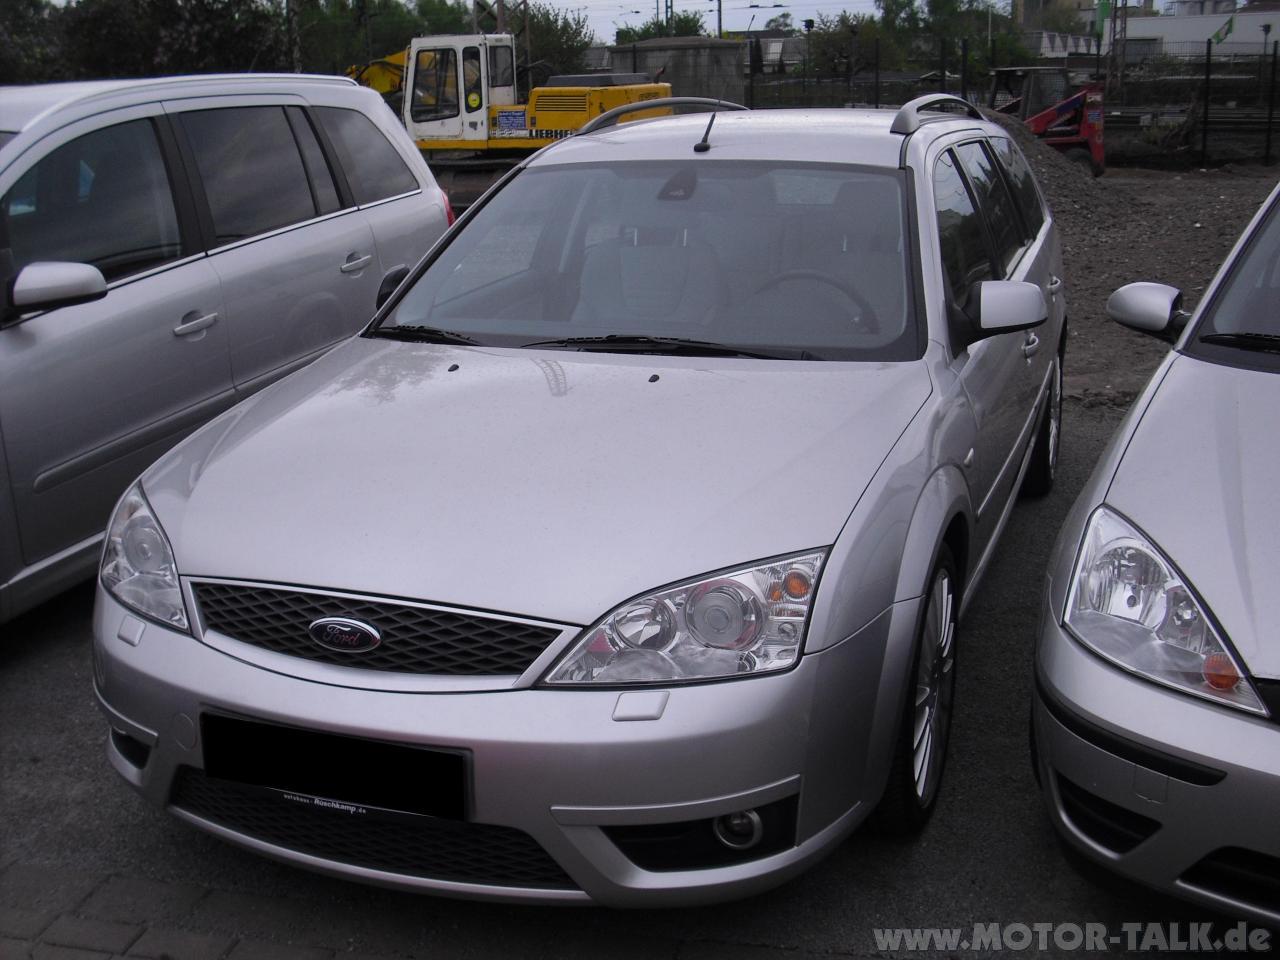 Ford mondeo st220 auspuff tuning #5